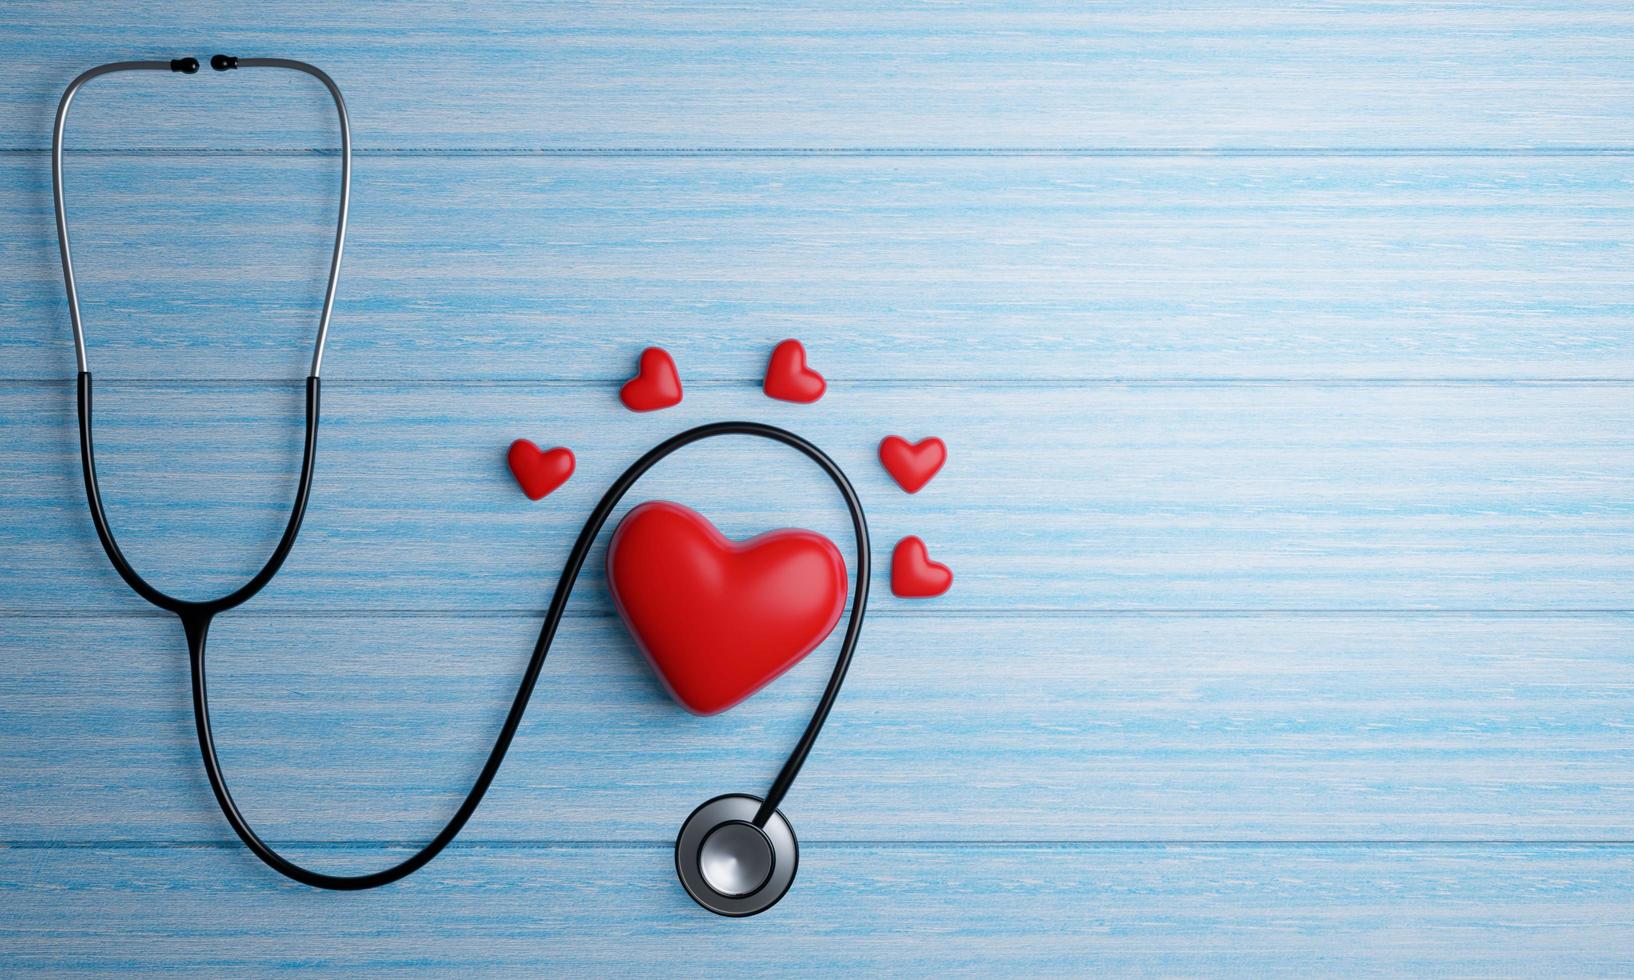 https://static.vecteezy.com/system/resources/previews/006/660/011/non_2x/medical-stethoscope-on-the-blue-plank-floor-small-and-large-red-heart-shaped-models-3d-rendering-free-photo.jpg